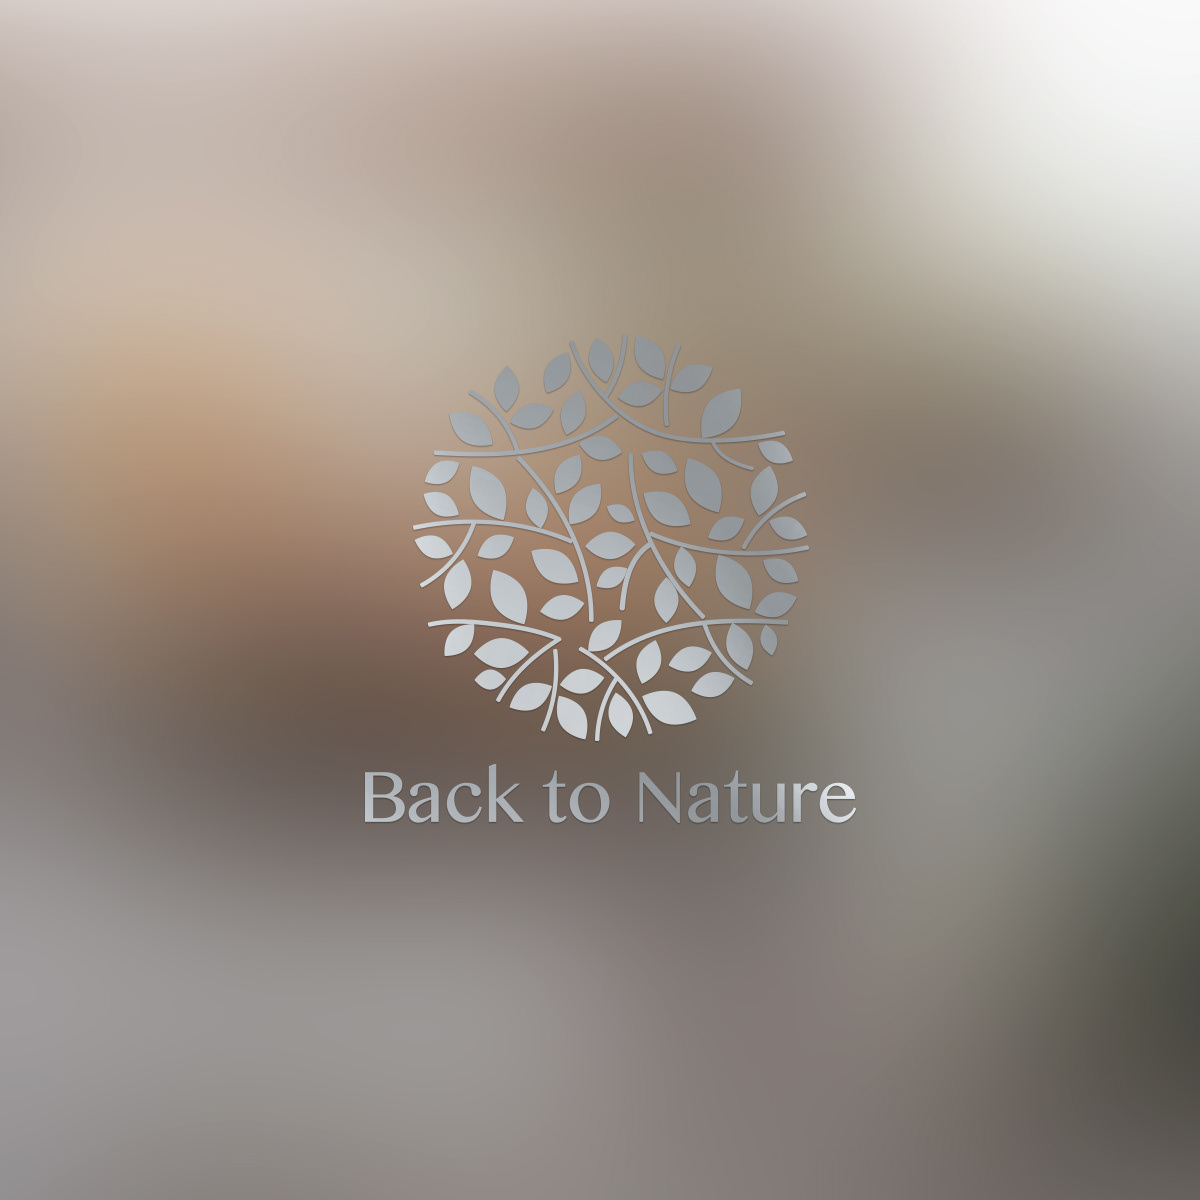 Sustainable serveware logo design for back to nature